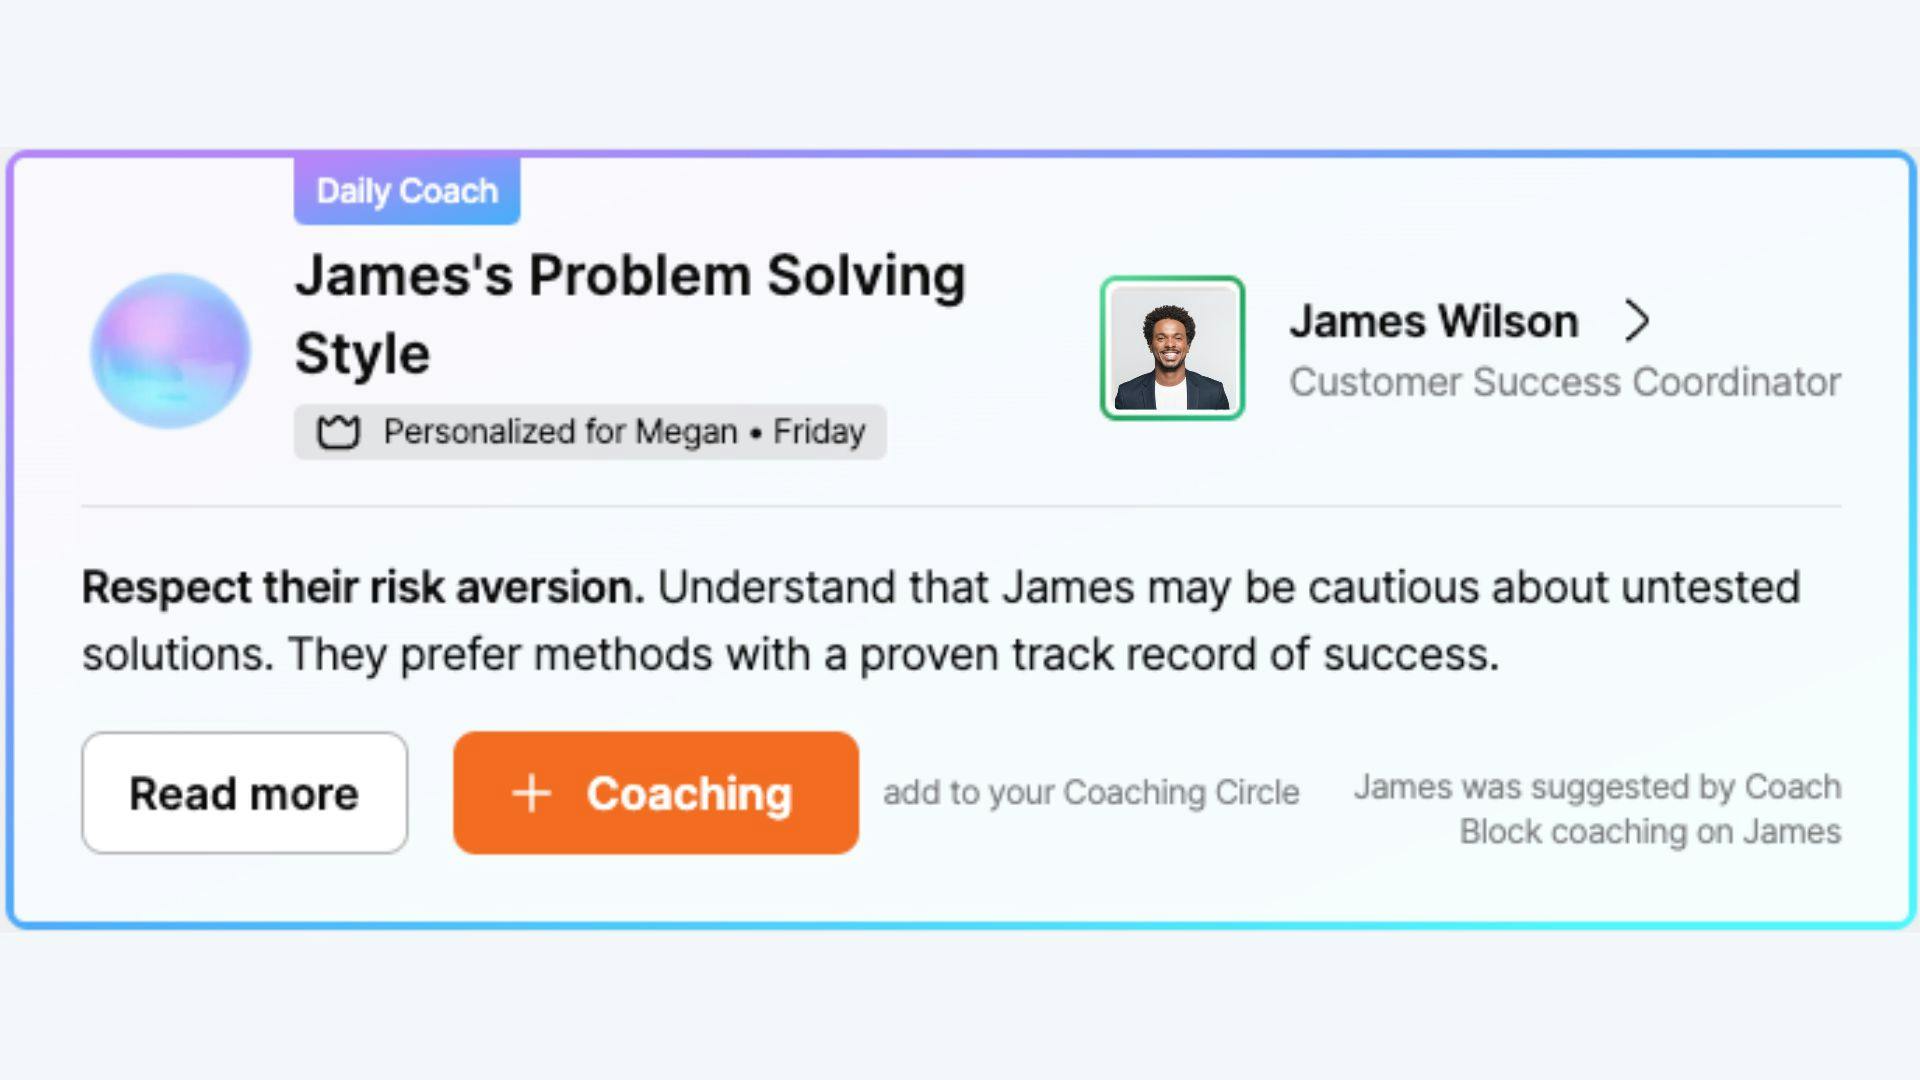 Image of daily coaching on the homepage of the Happy Platform where a user can easily add someone to their coaching circle with the click of a button